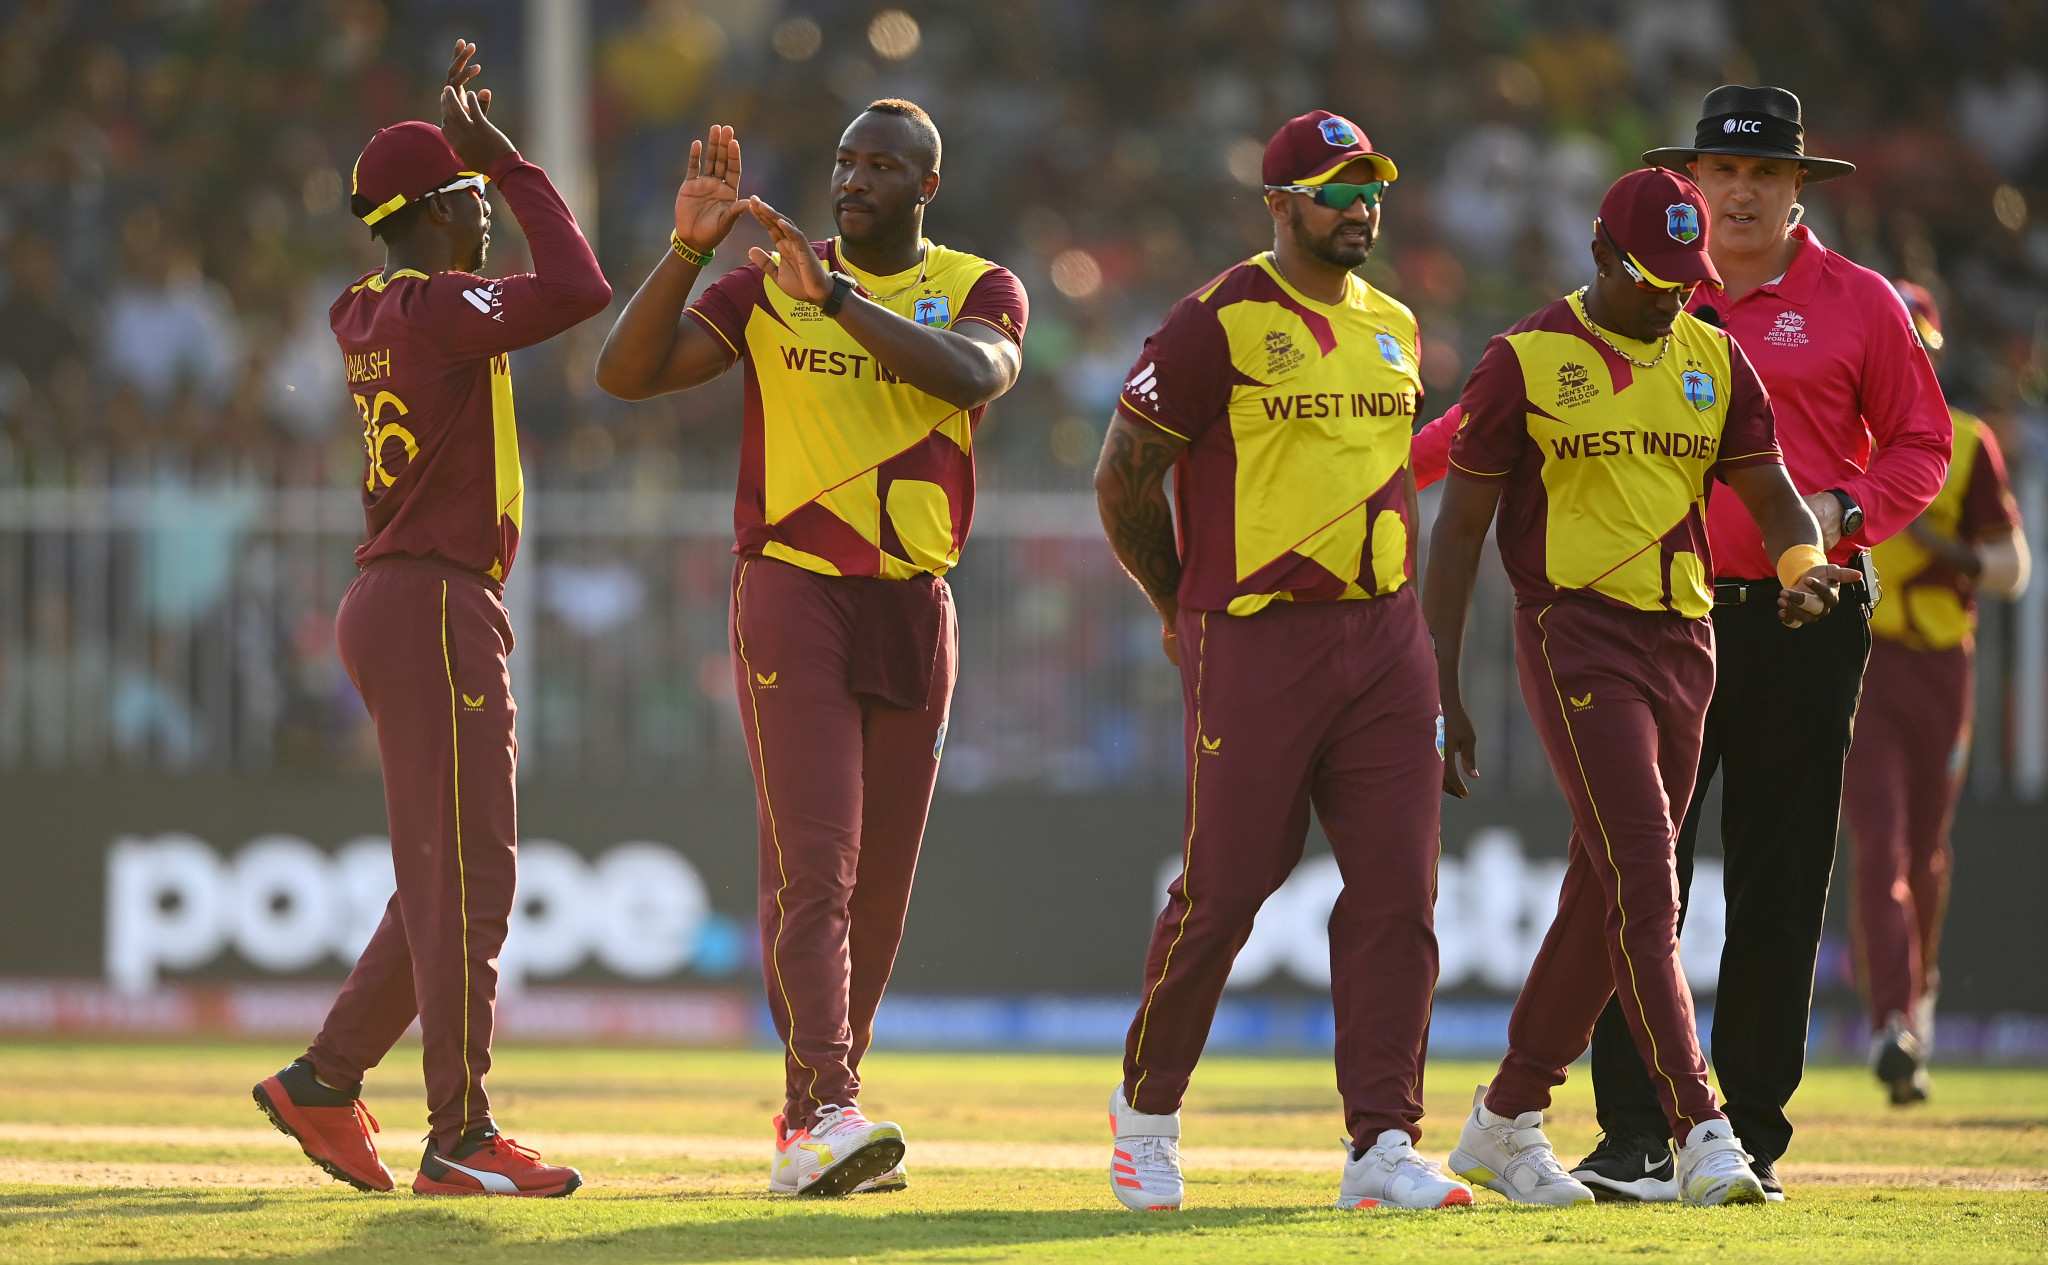 Holders West Indies earn first win of T20 World Cup after last ball victory over Bangladesh